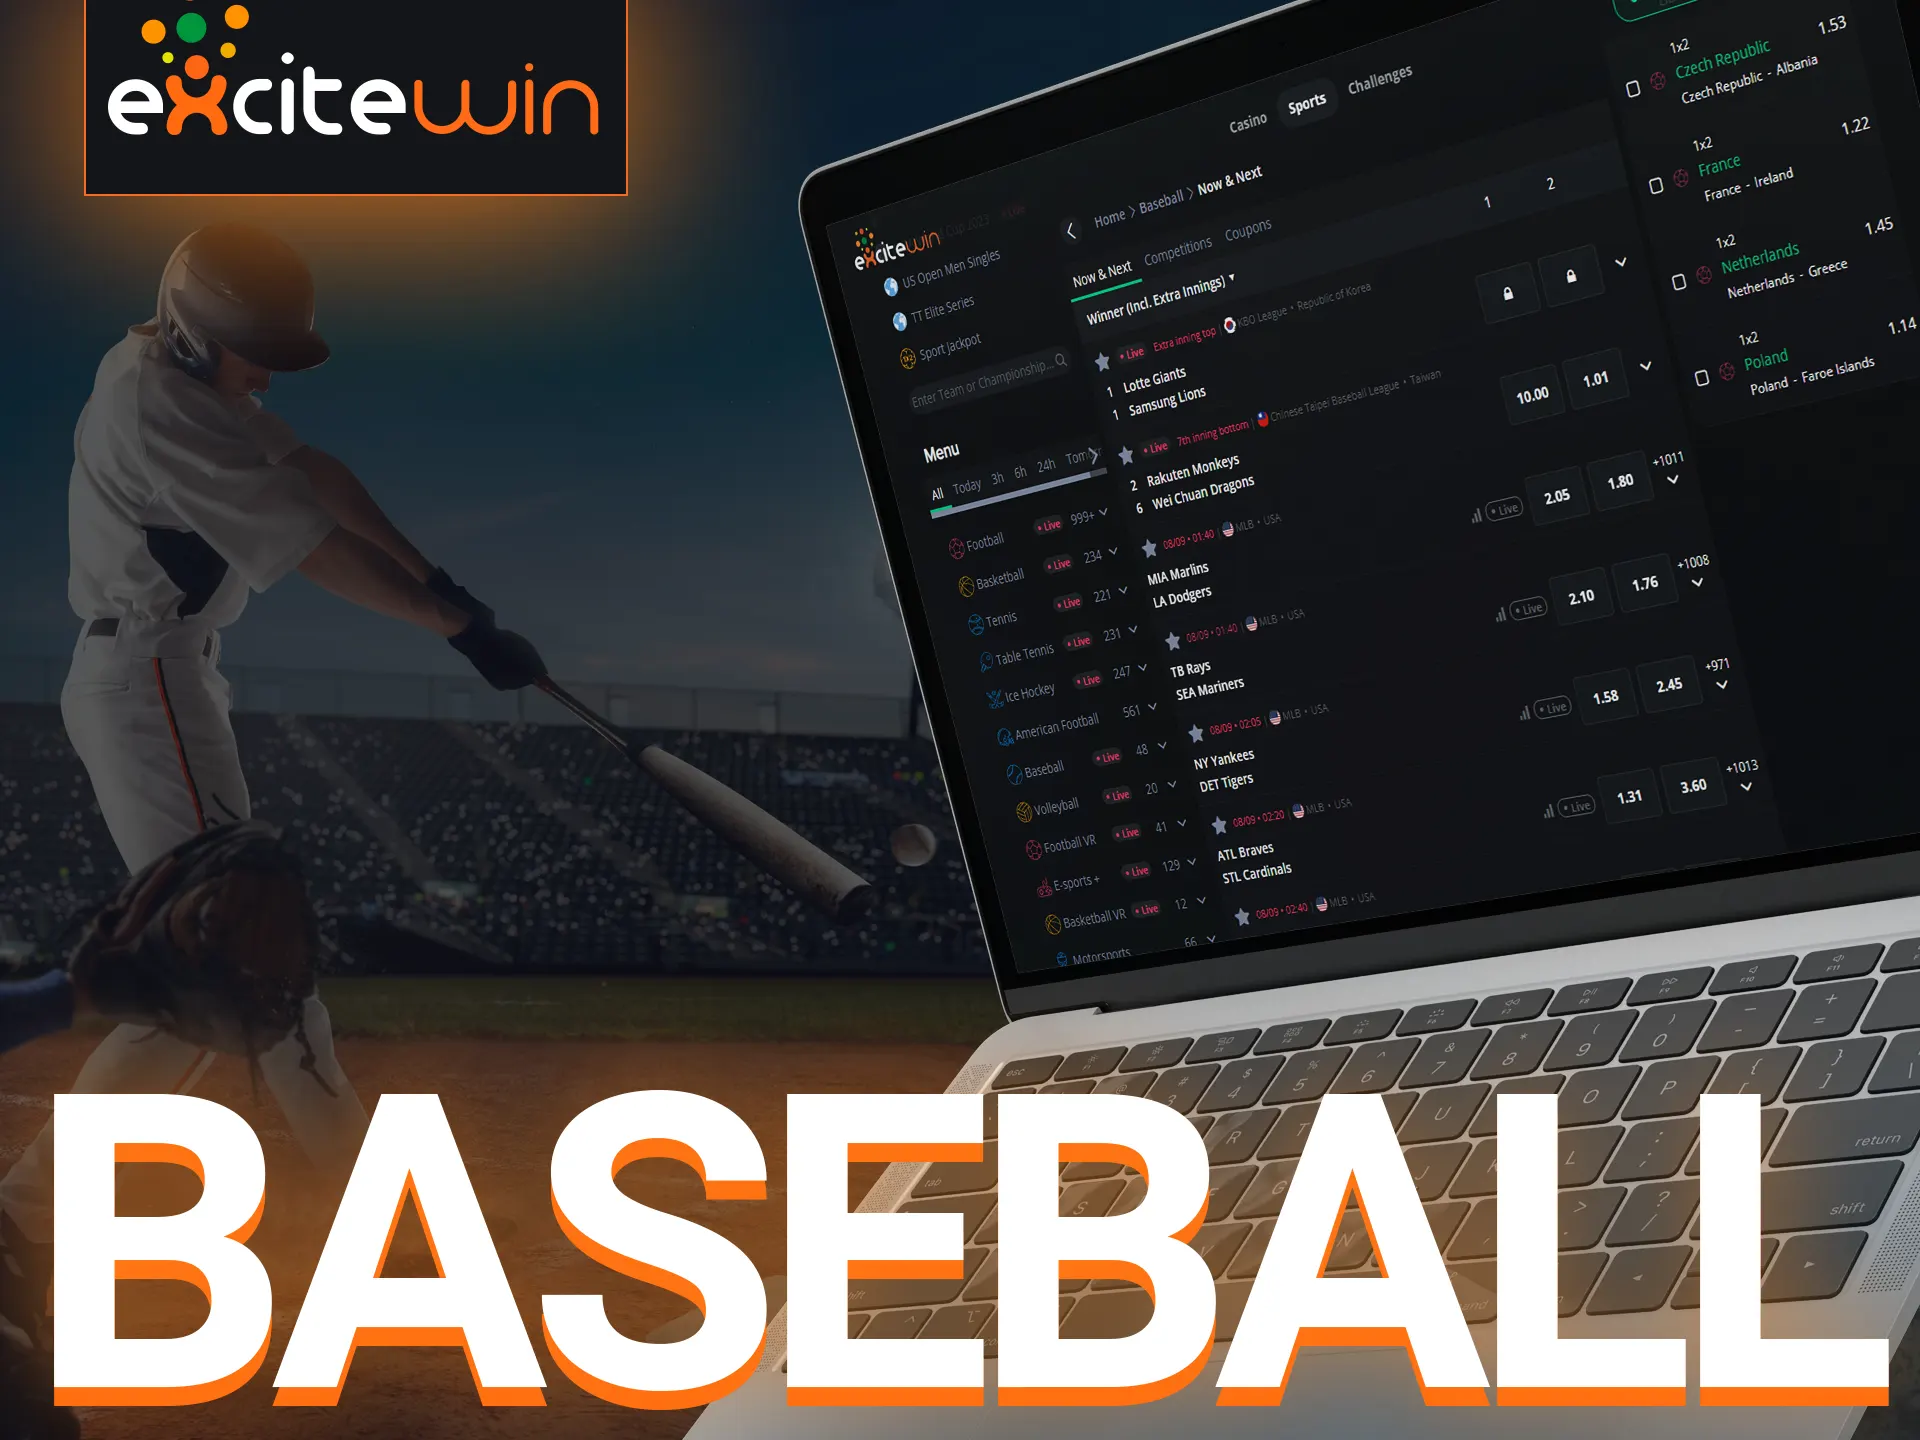 Place bets on baseball games with Excitewin.